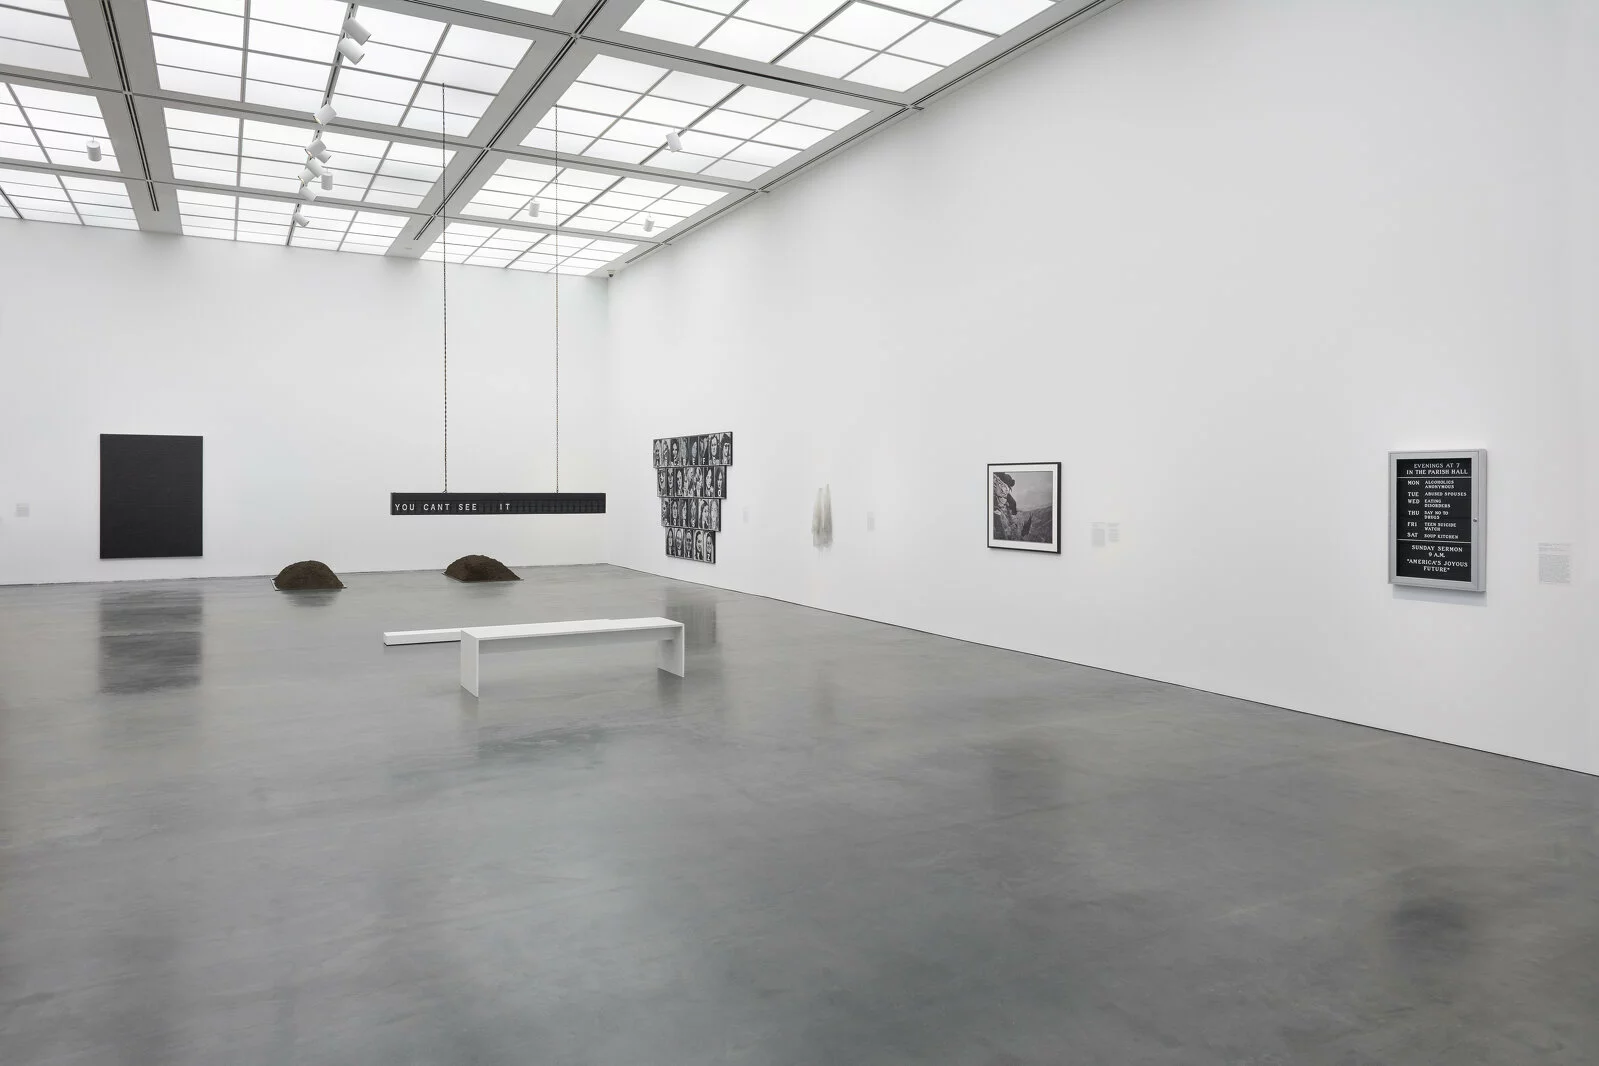 Large, white gallery space with five artworks visible. Three are hung on the wall; two are installations.